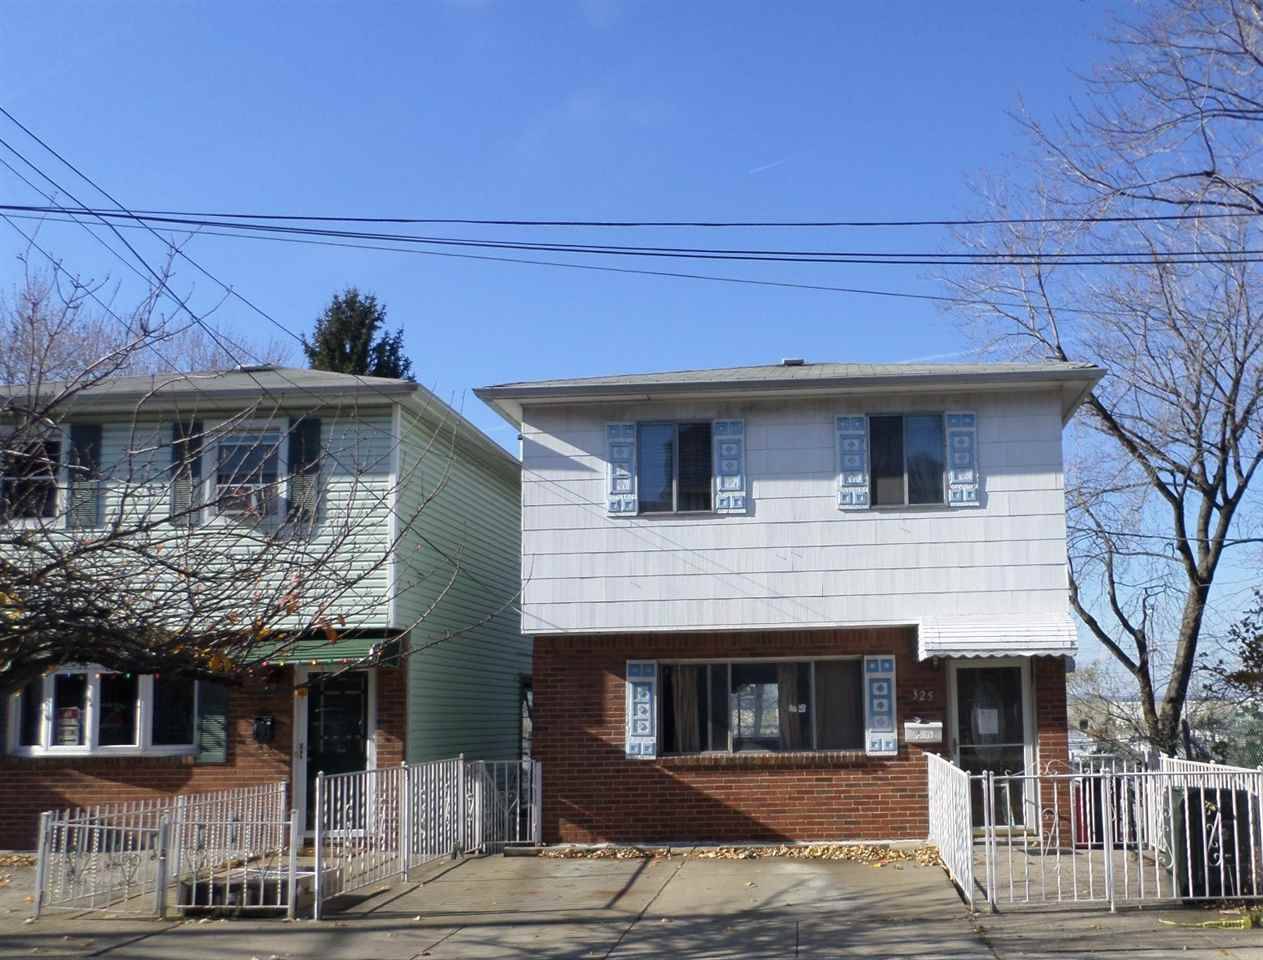 Single family home on a quiet street - 3 BR The Heights New Jersey